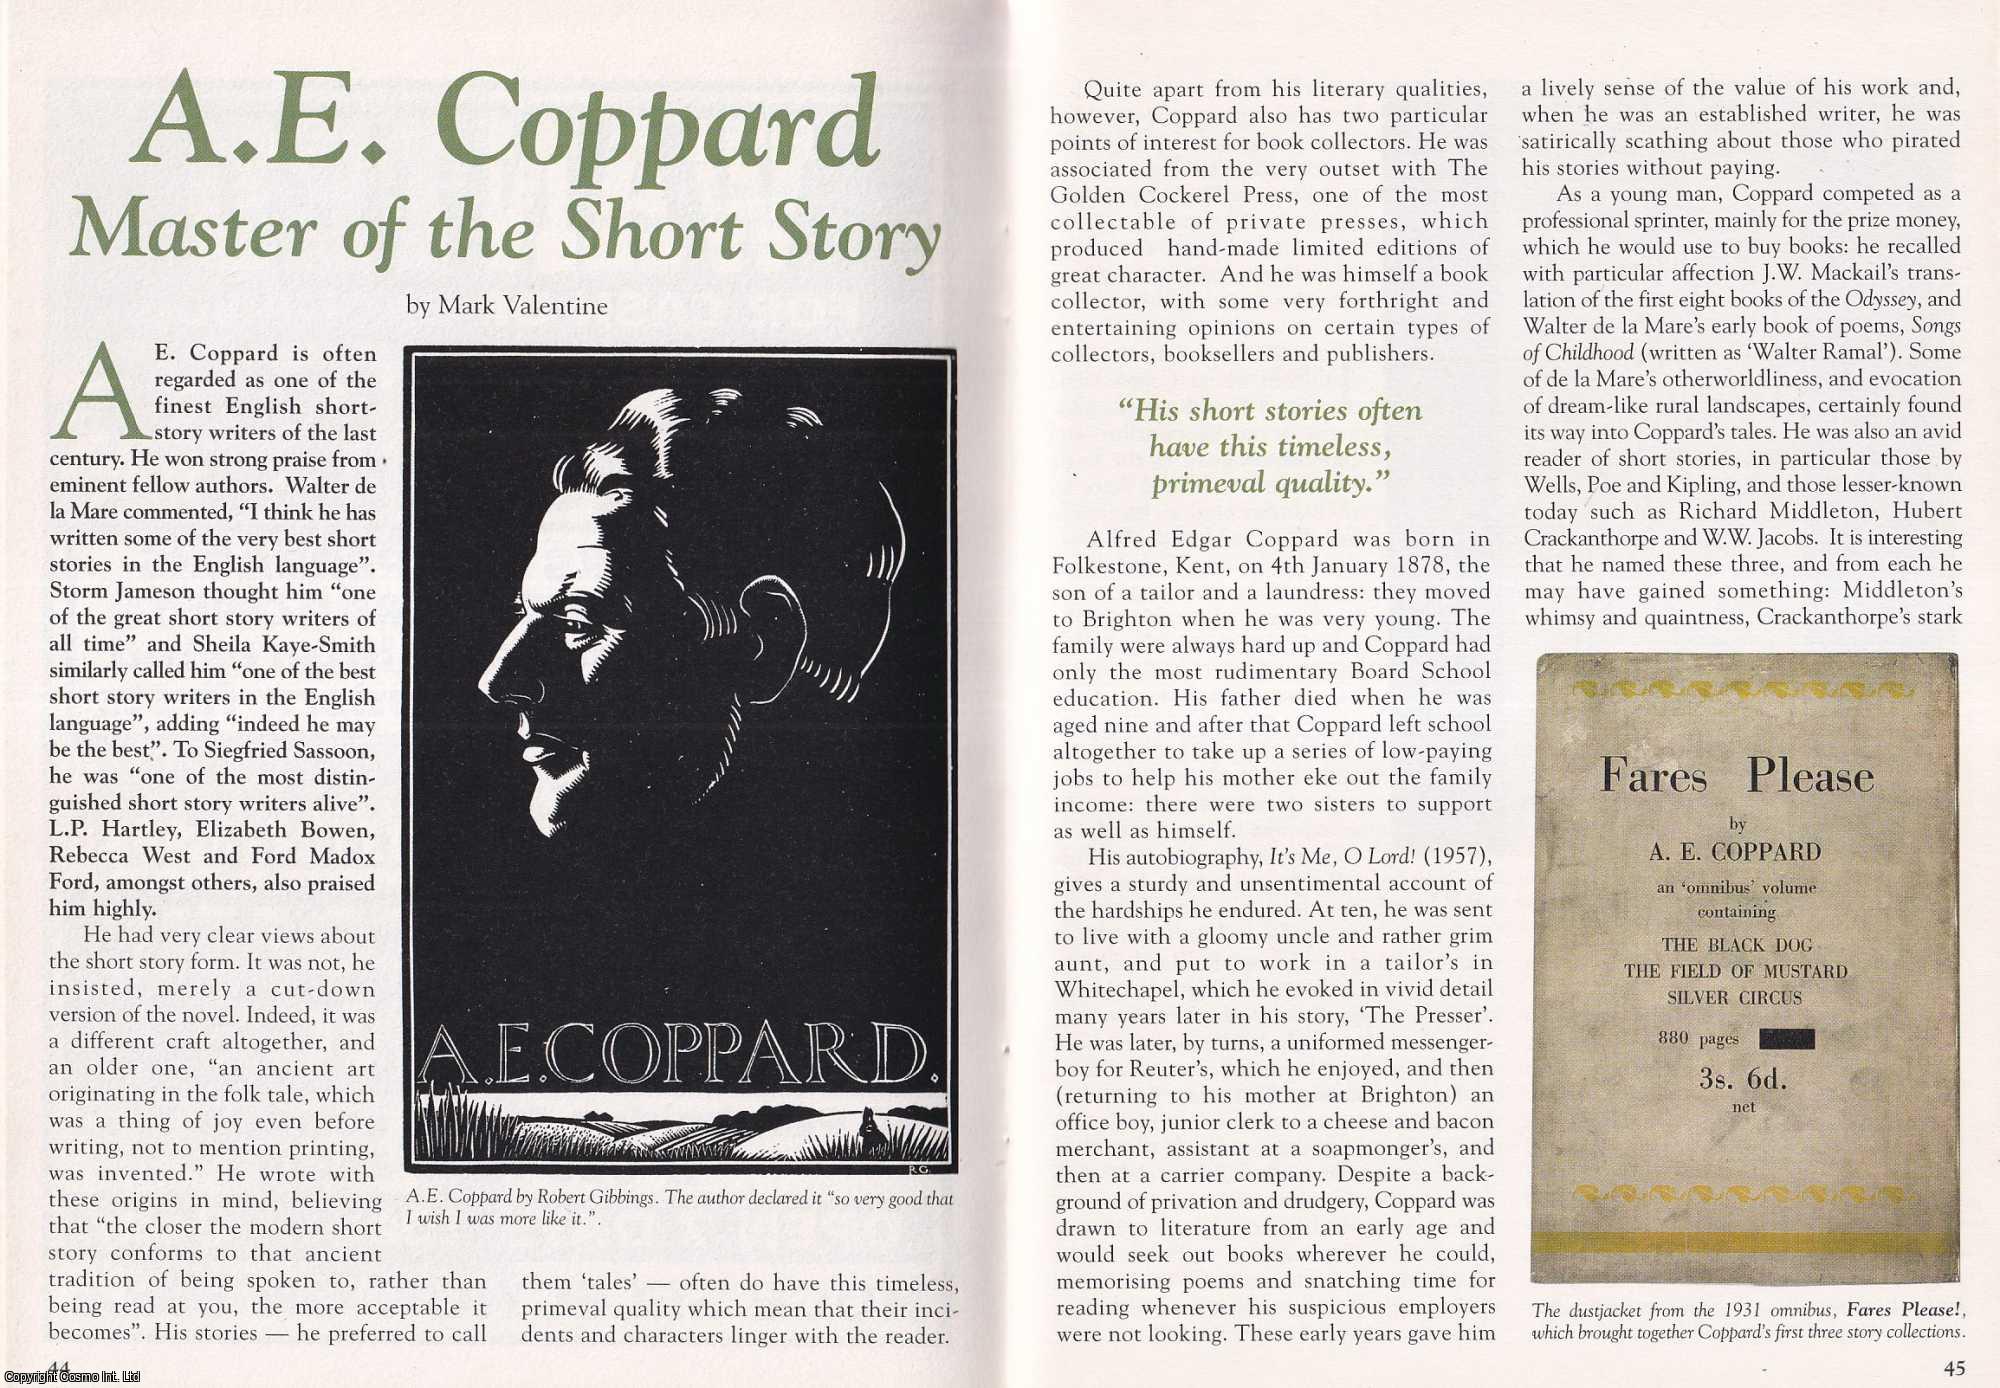 Mark Valentine - A. E. Coppard. Master of The Short Story. This is an original article separated from an issue of The Book & Magazine Collector publication.